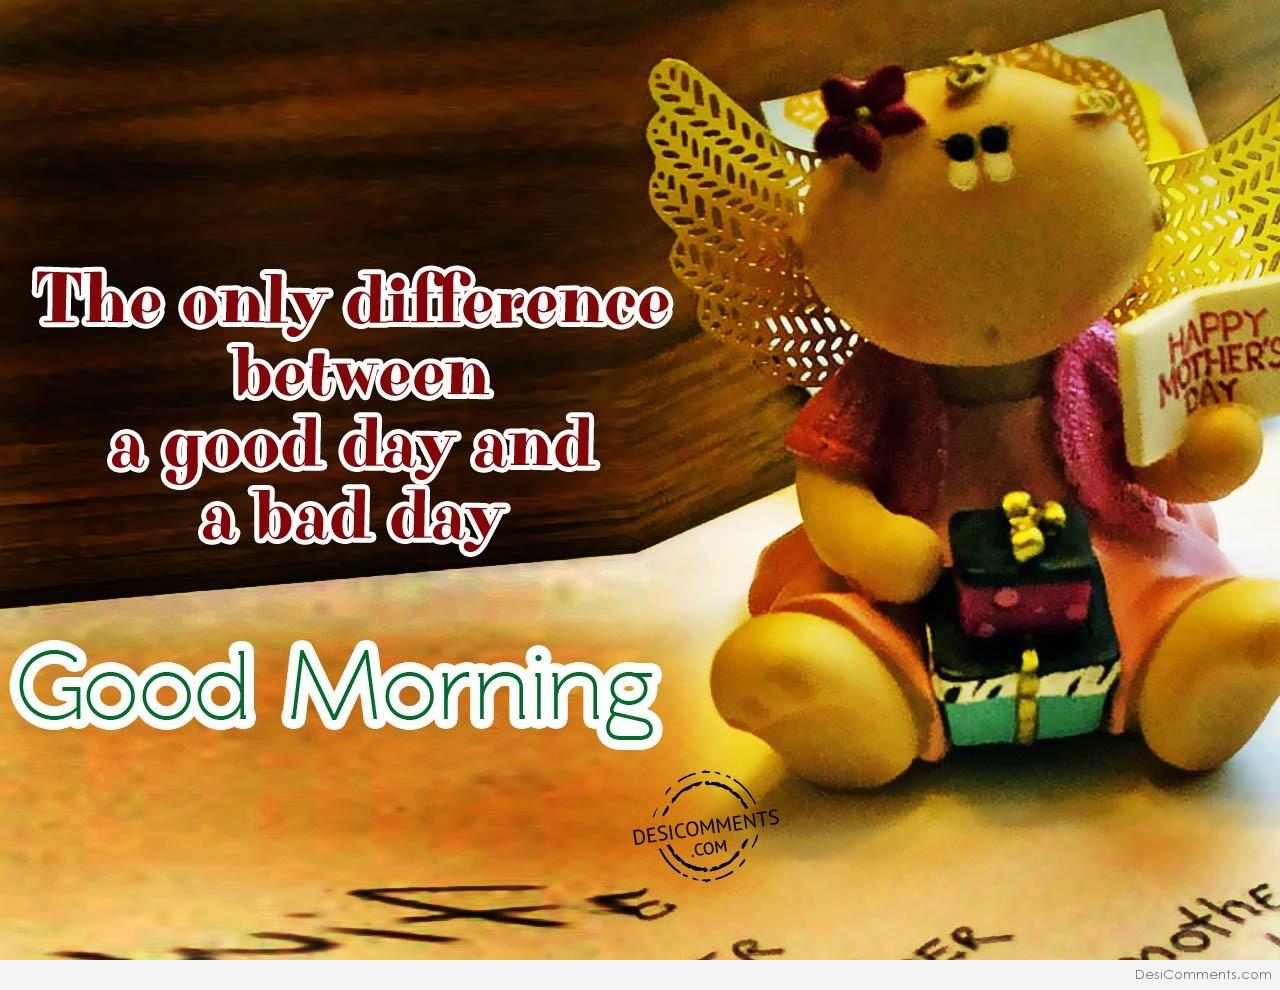 A Good Day And A Bad Day – Good Morning - Desi Comments